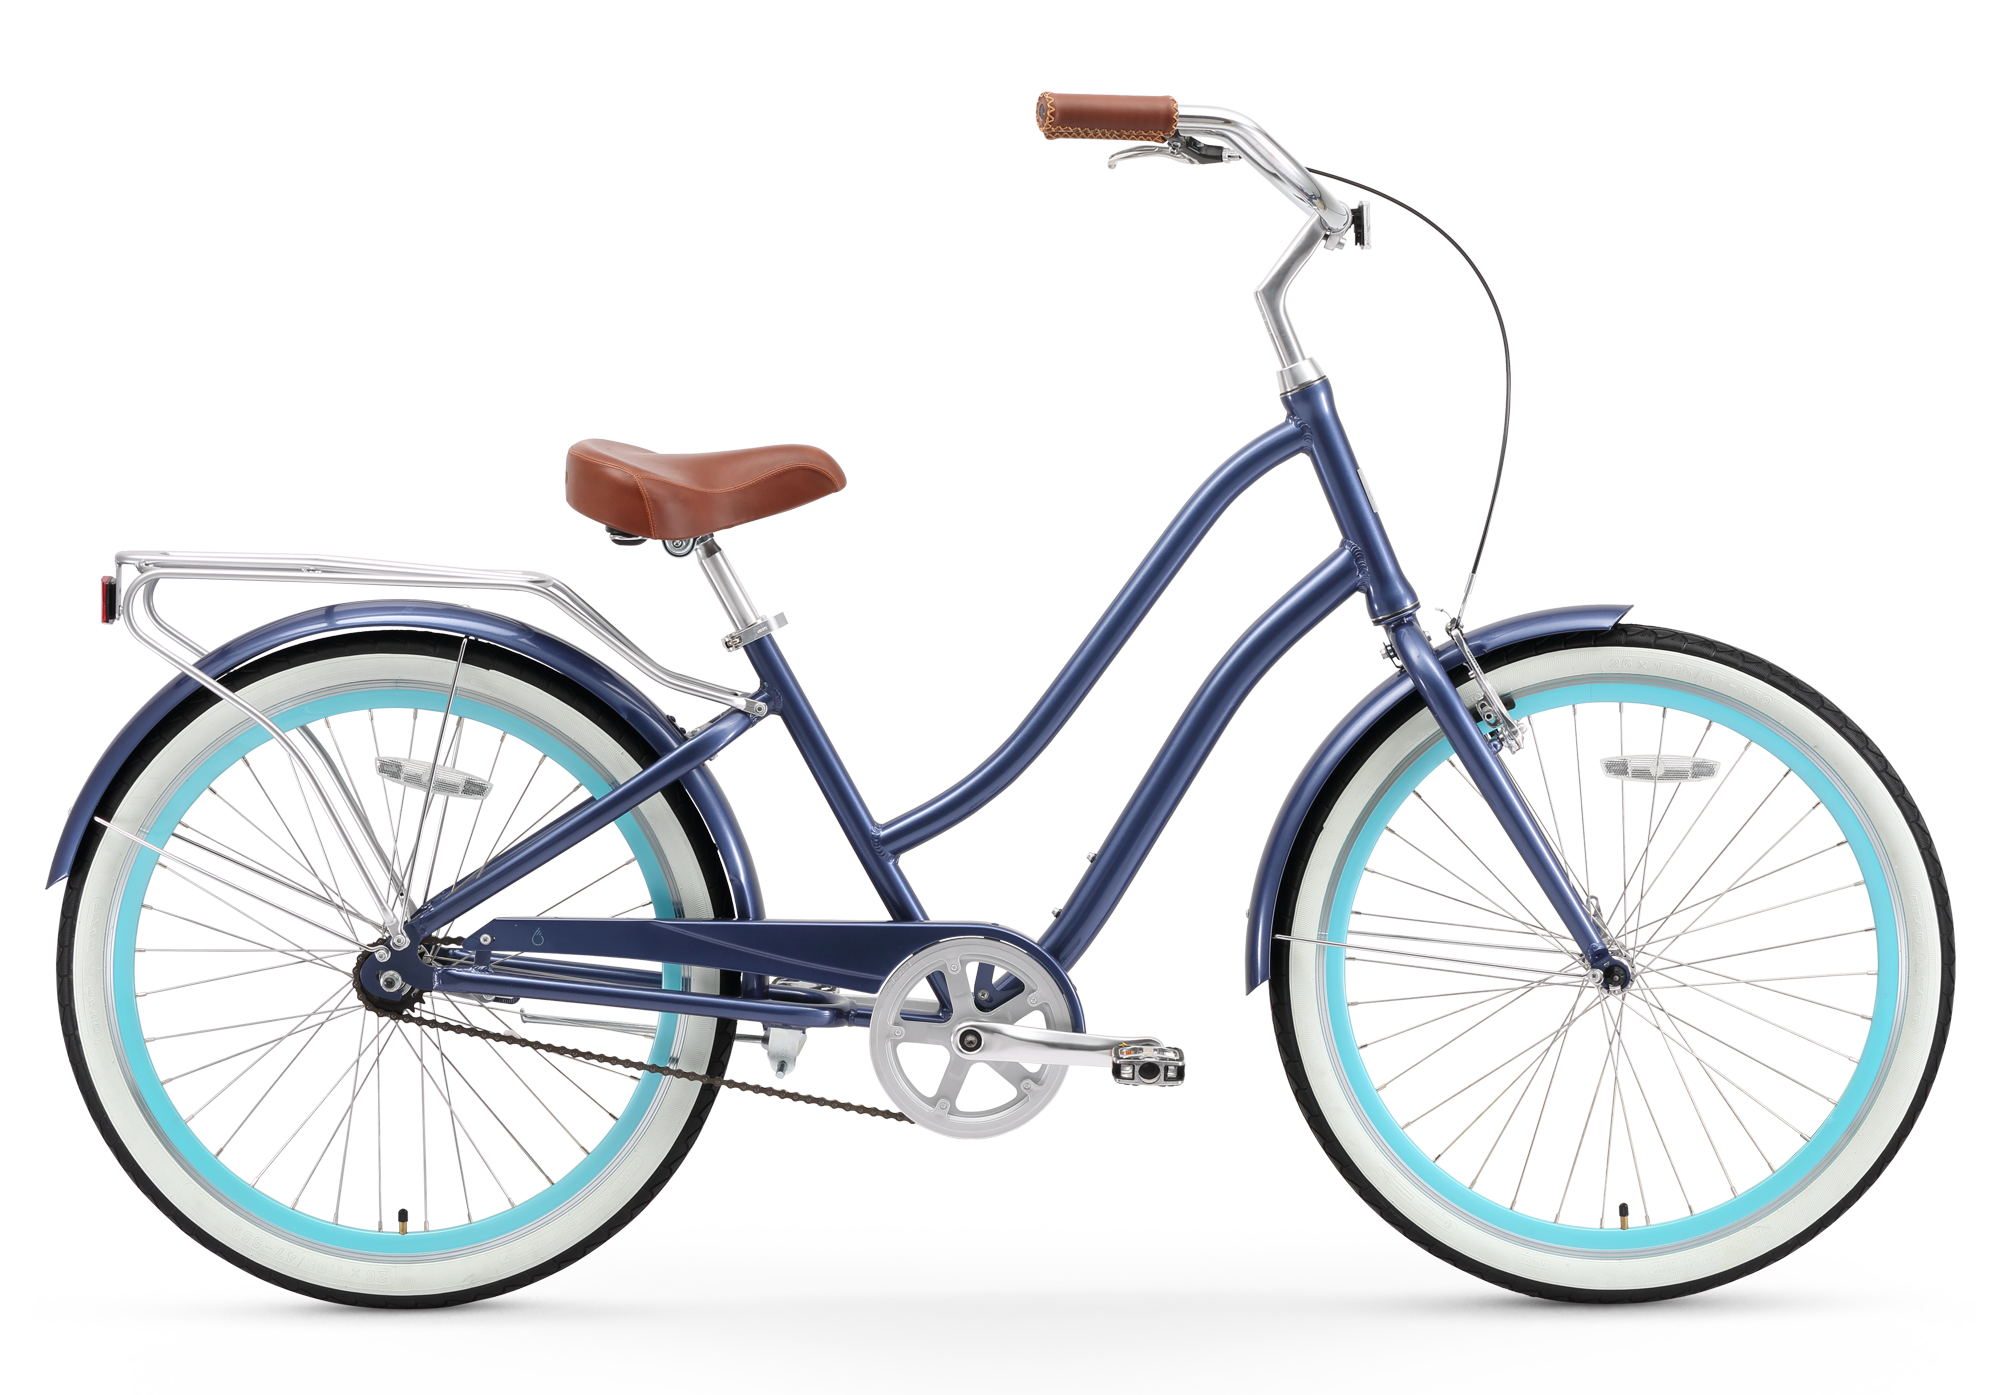 Navy with Brown Seat and Grips sixthreezero EVRYjourney Womens 3-Speed Step-Through Hybrid Cruiser Bicycle 14 Frame Model:630107 24 Wheels 